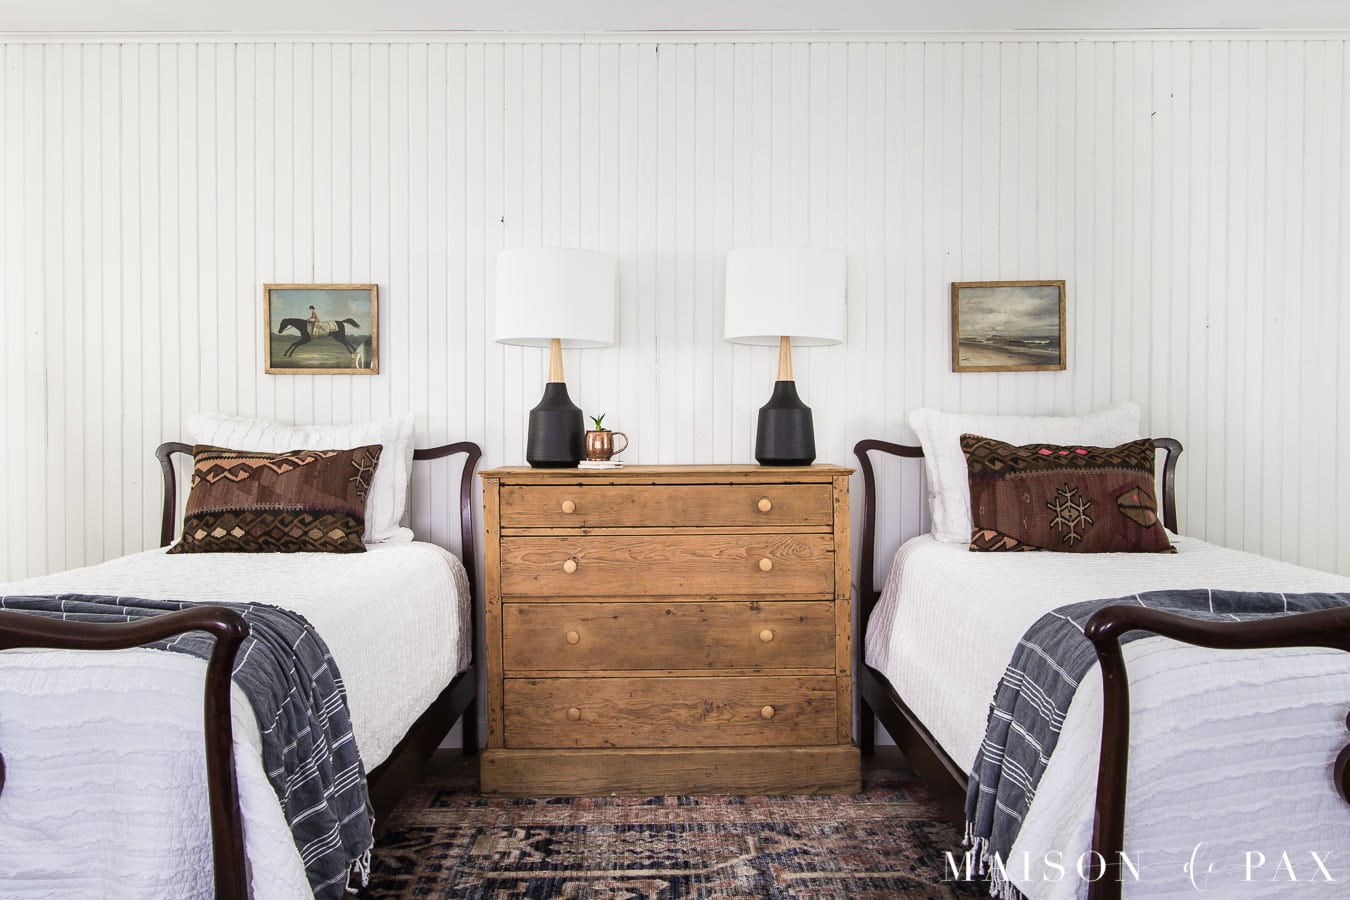 antique twin beds with modern lamps and rustic dresser | maison de pax